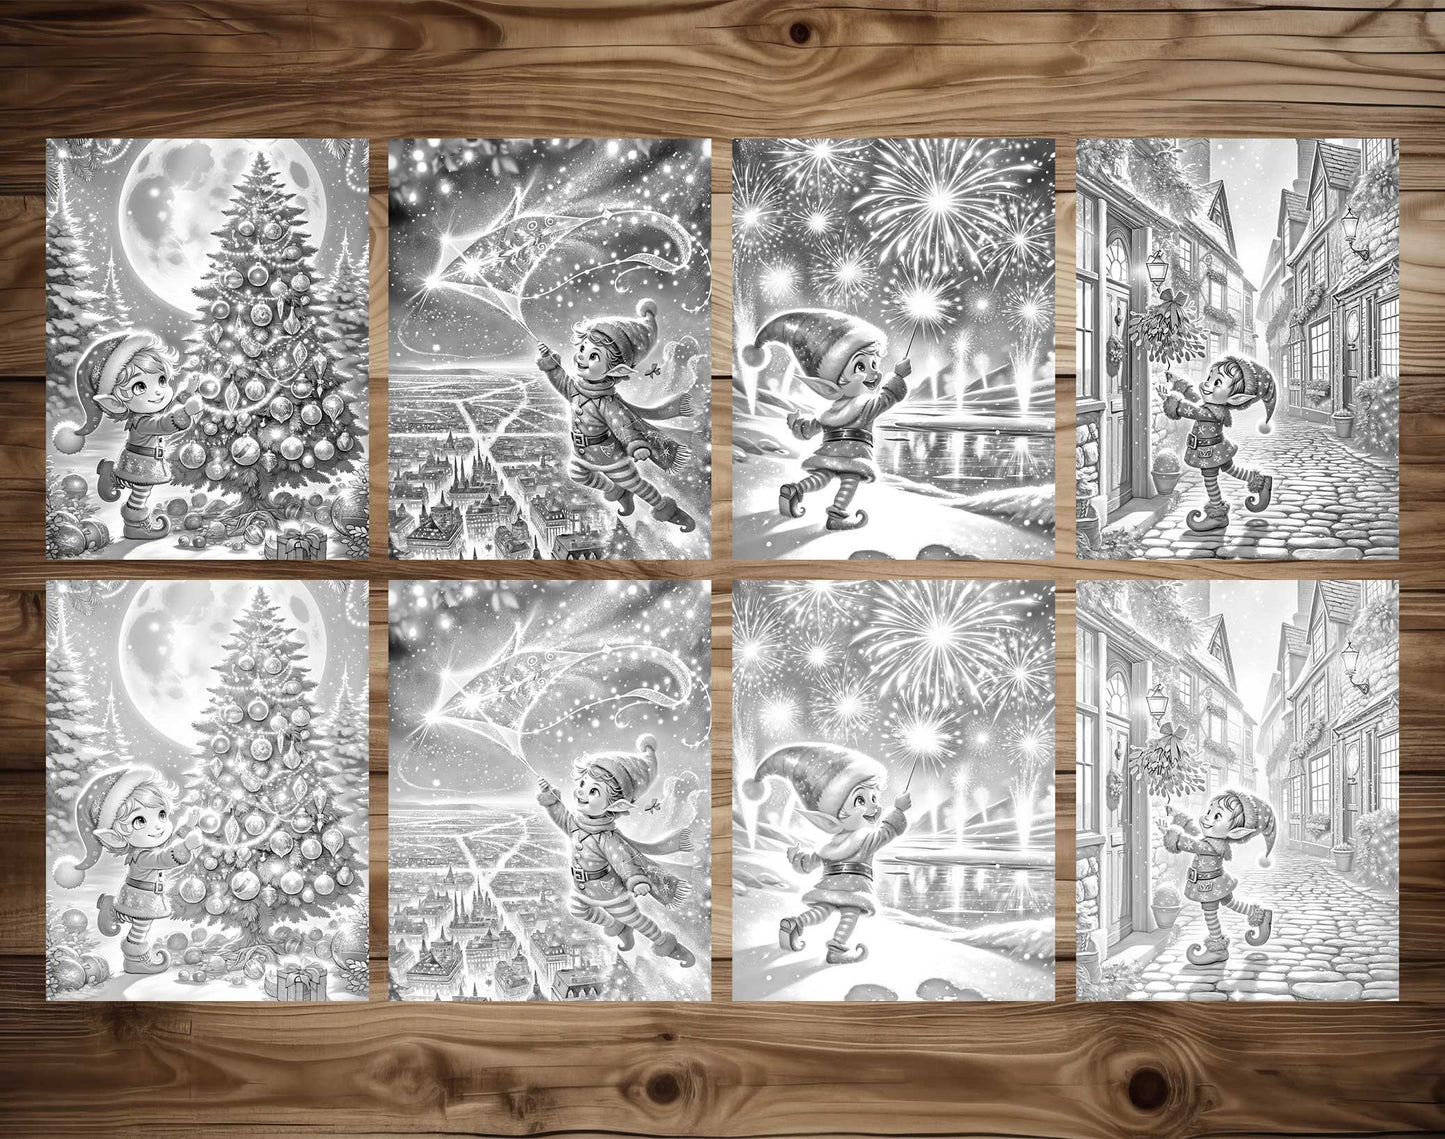 50 Elf's Journey Grayscale Coloring Pages - Instant Download - Printable Dark/Light